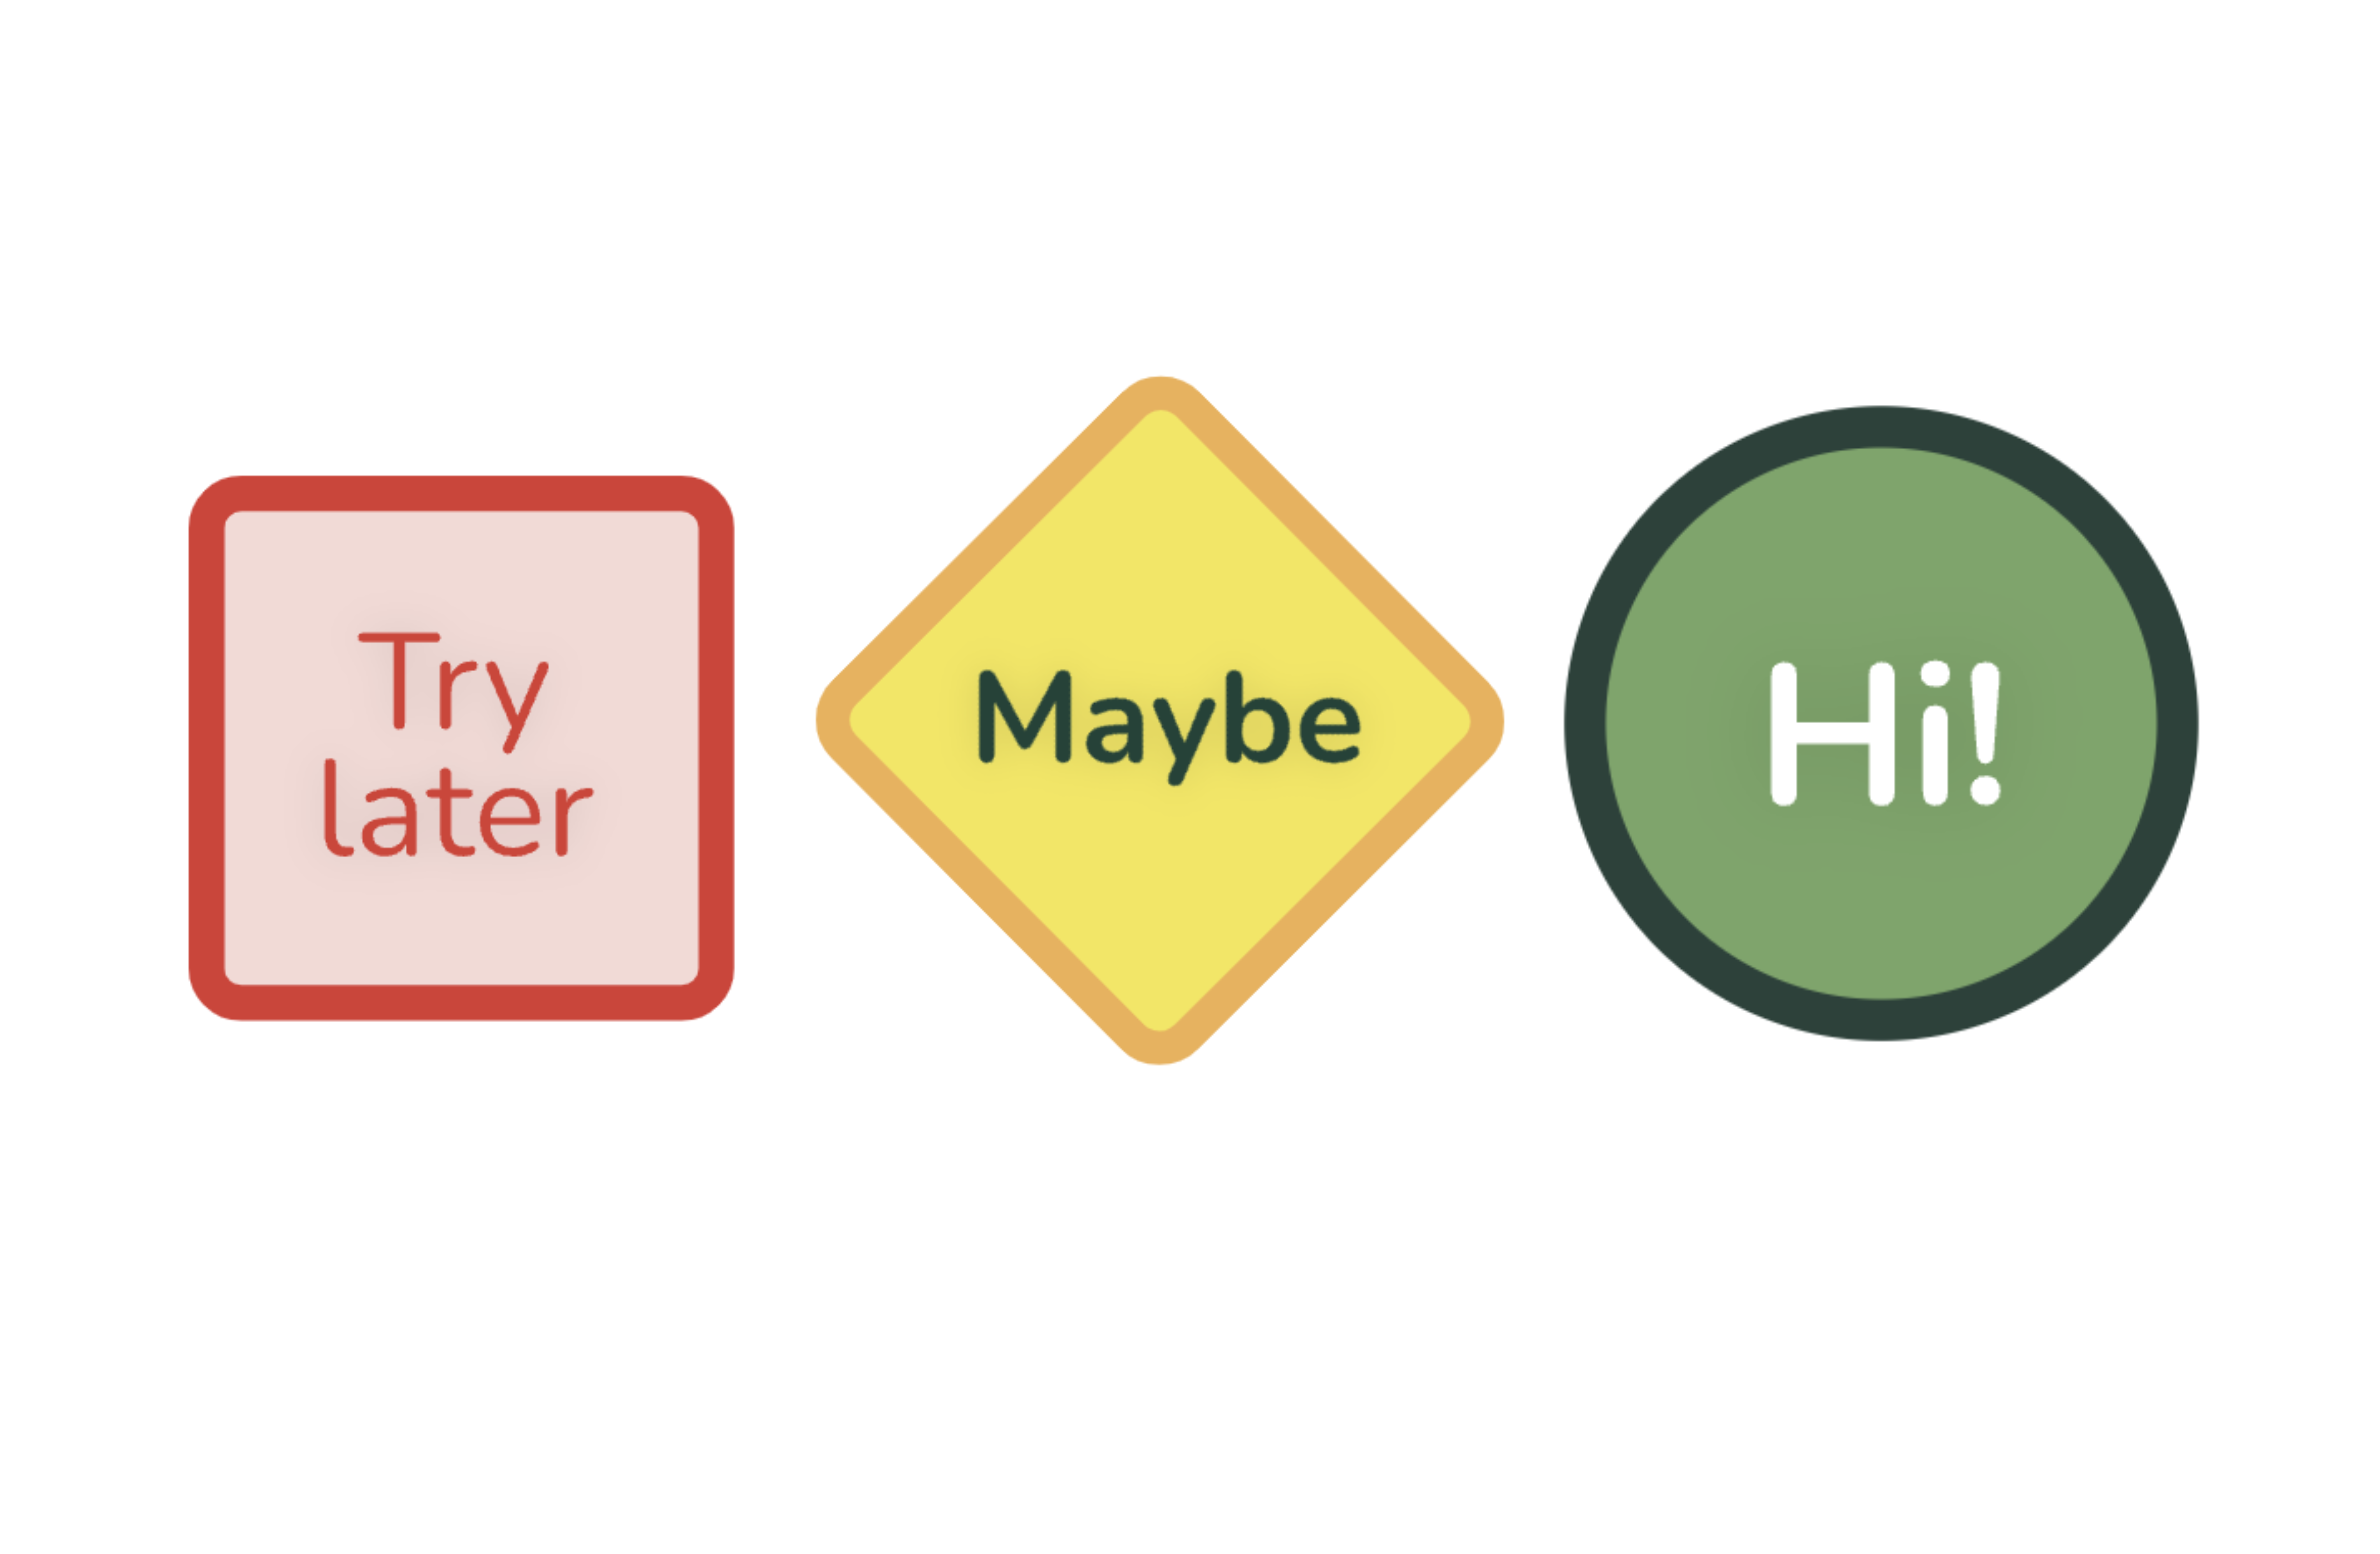 How We Use Interaction Badges